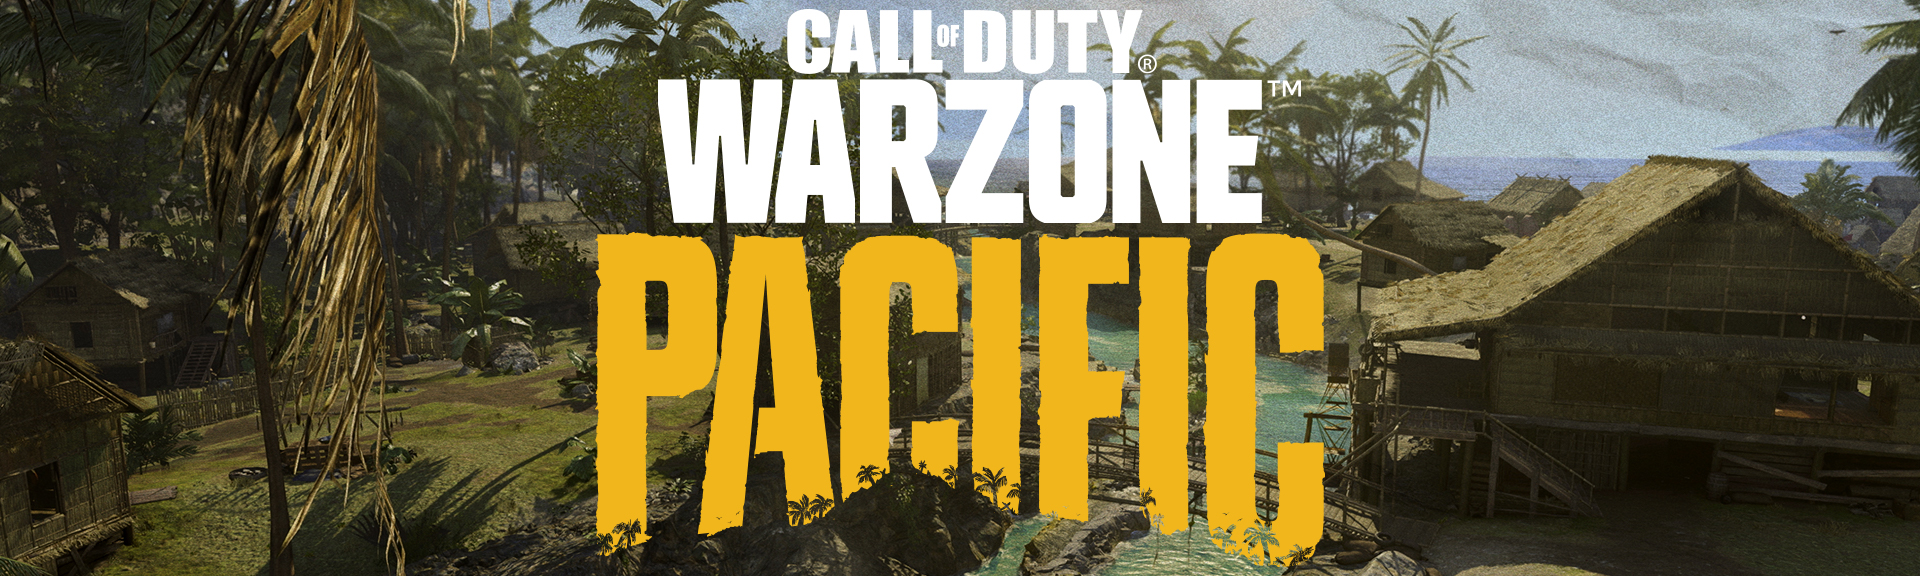 Call of Duty: Warzone Season One Patch Notes